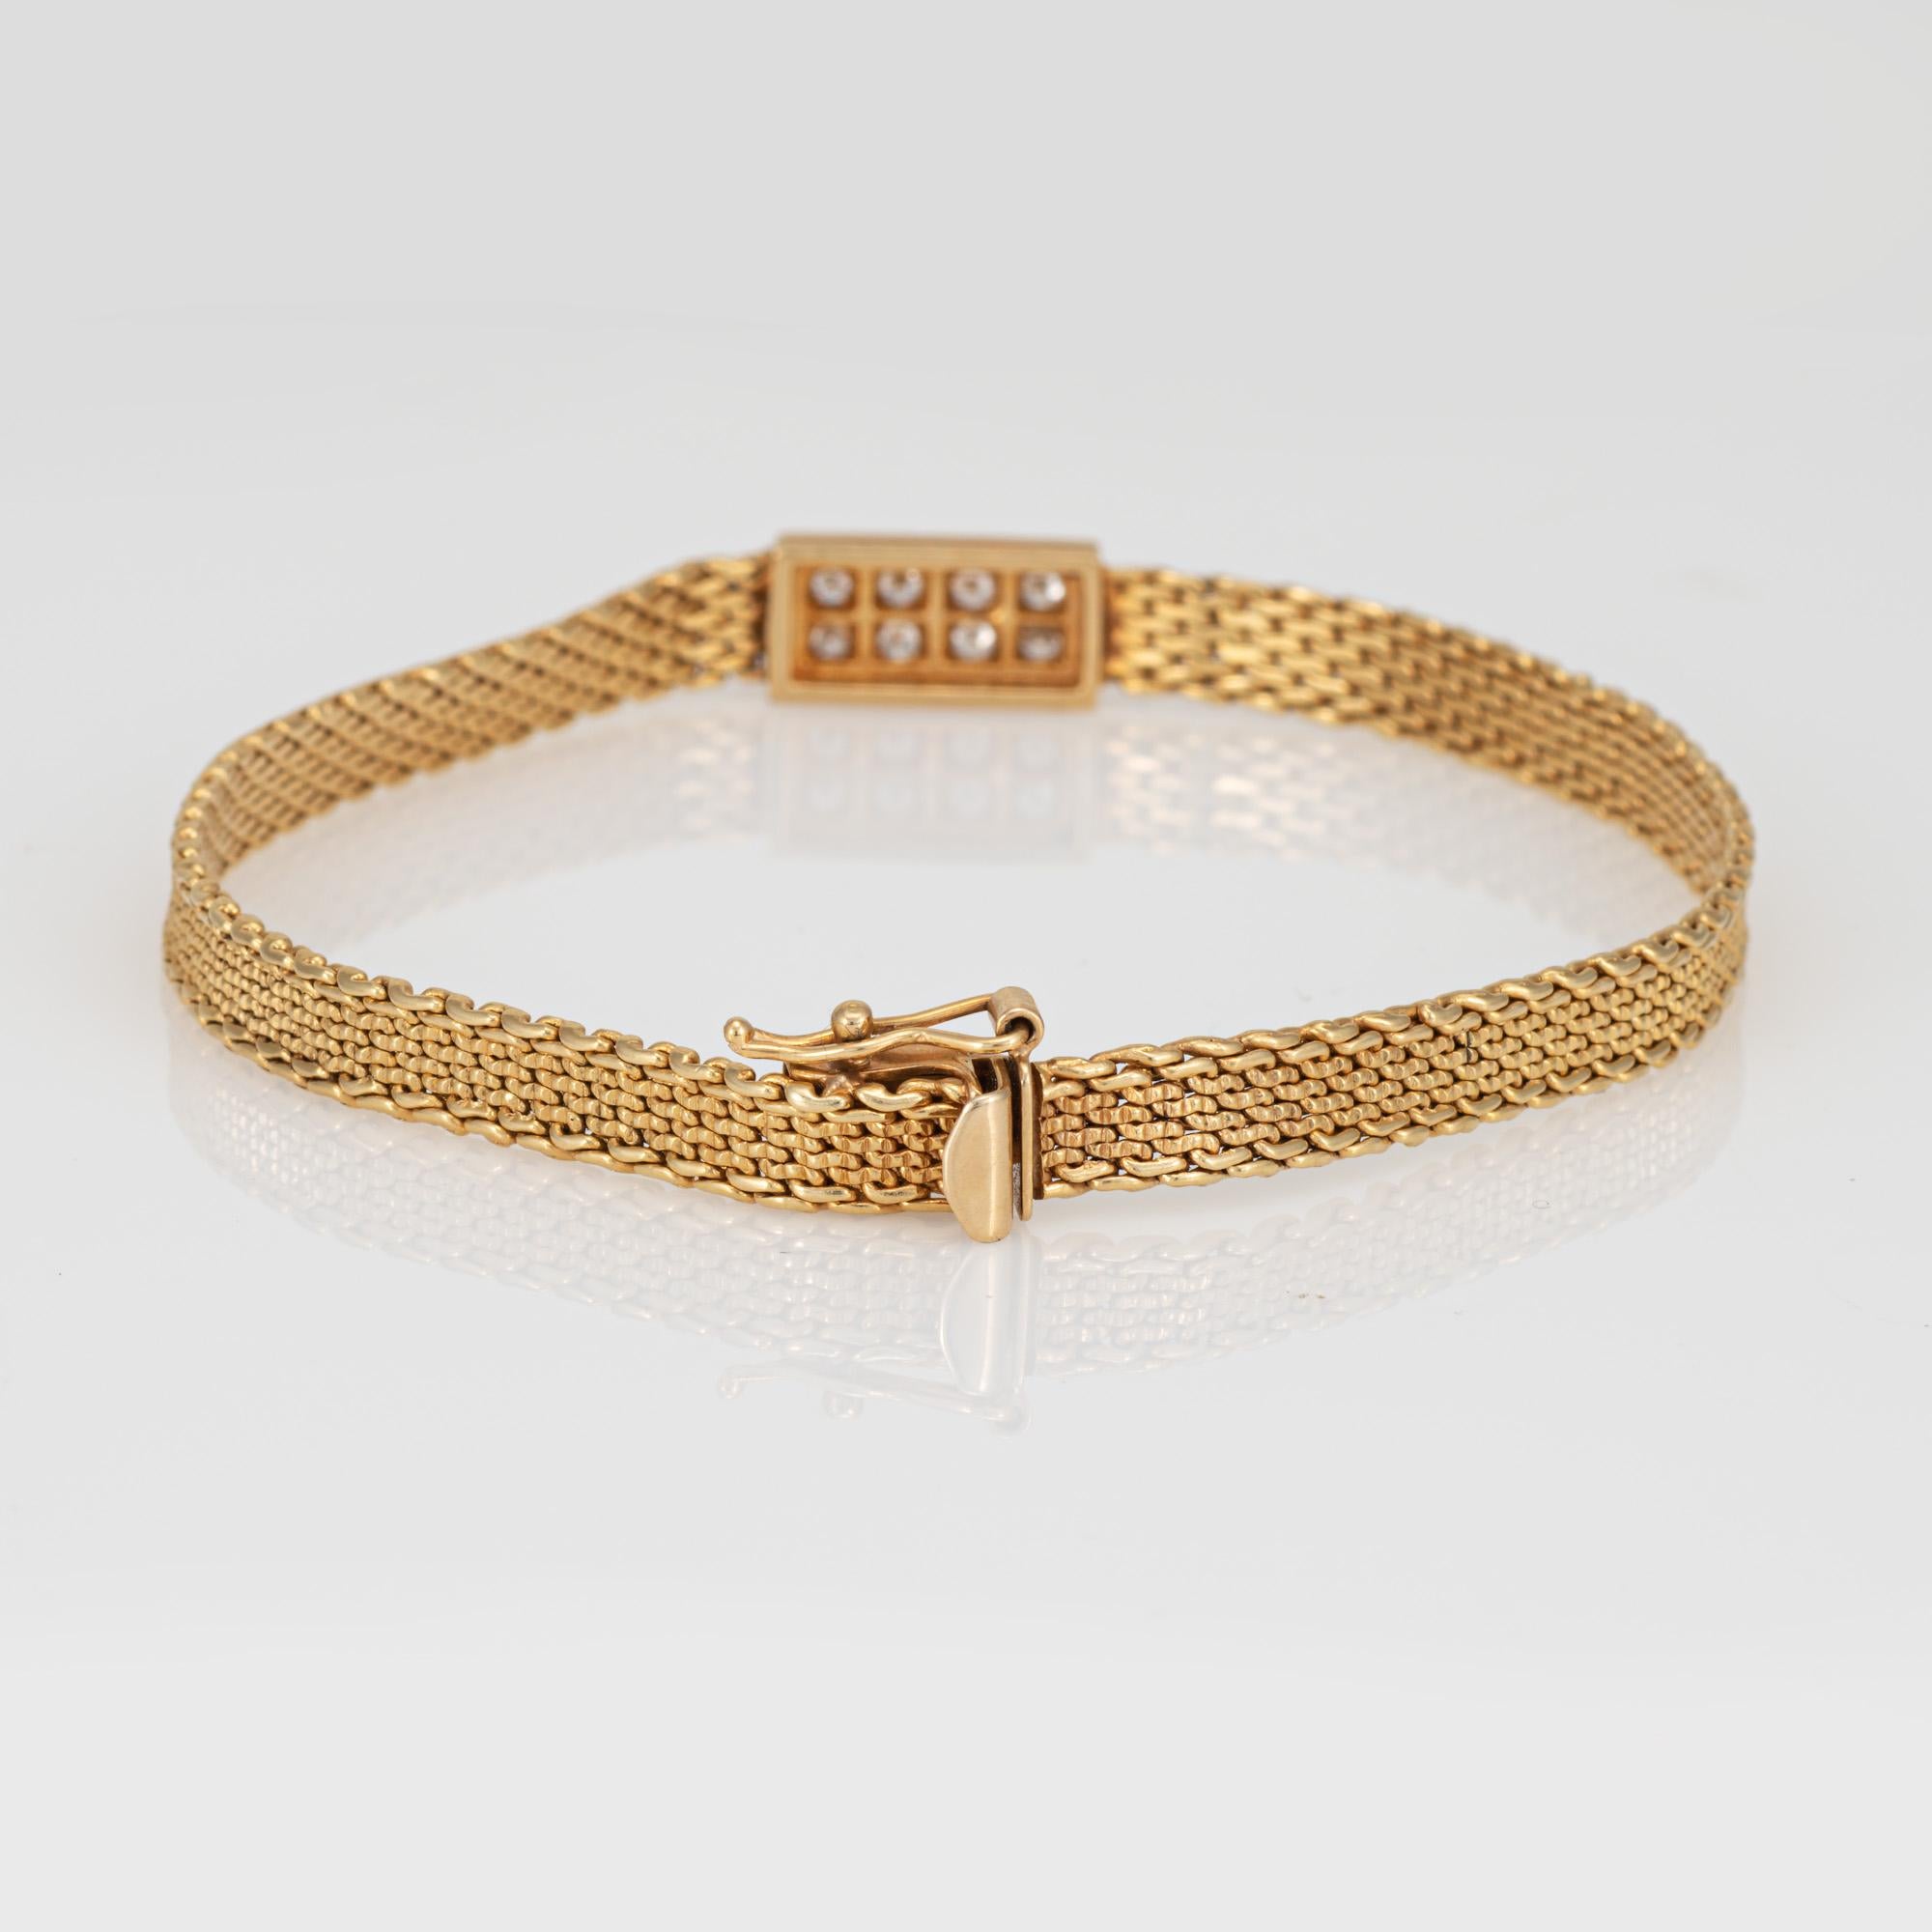 Stylish and nicely detailed vintage diamond bracelet crafted in 14 karat yellow gold (circa 1960s). 

Eight small diamonds total an estimated 0.08 carats (estimated at I-J color and SI2-I1 clarity). 

The slinky narrow (5mm - 0.19 inches) mesh